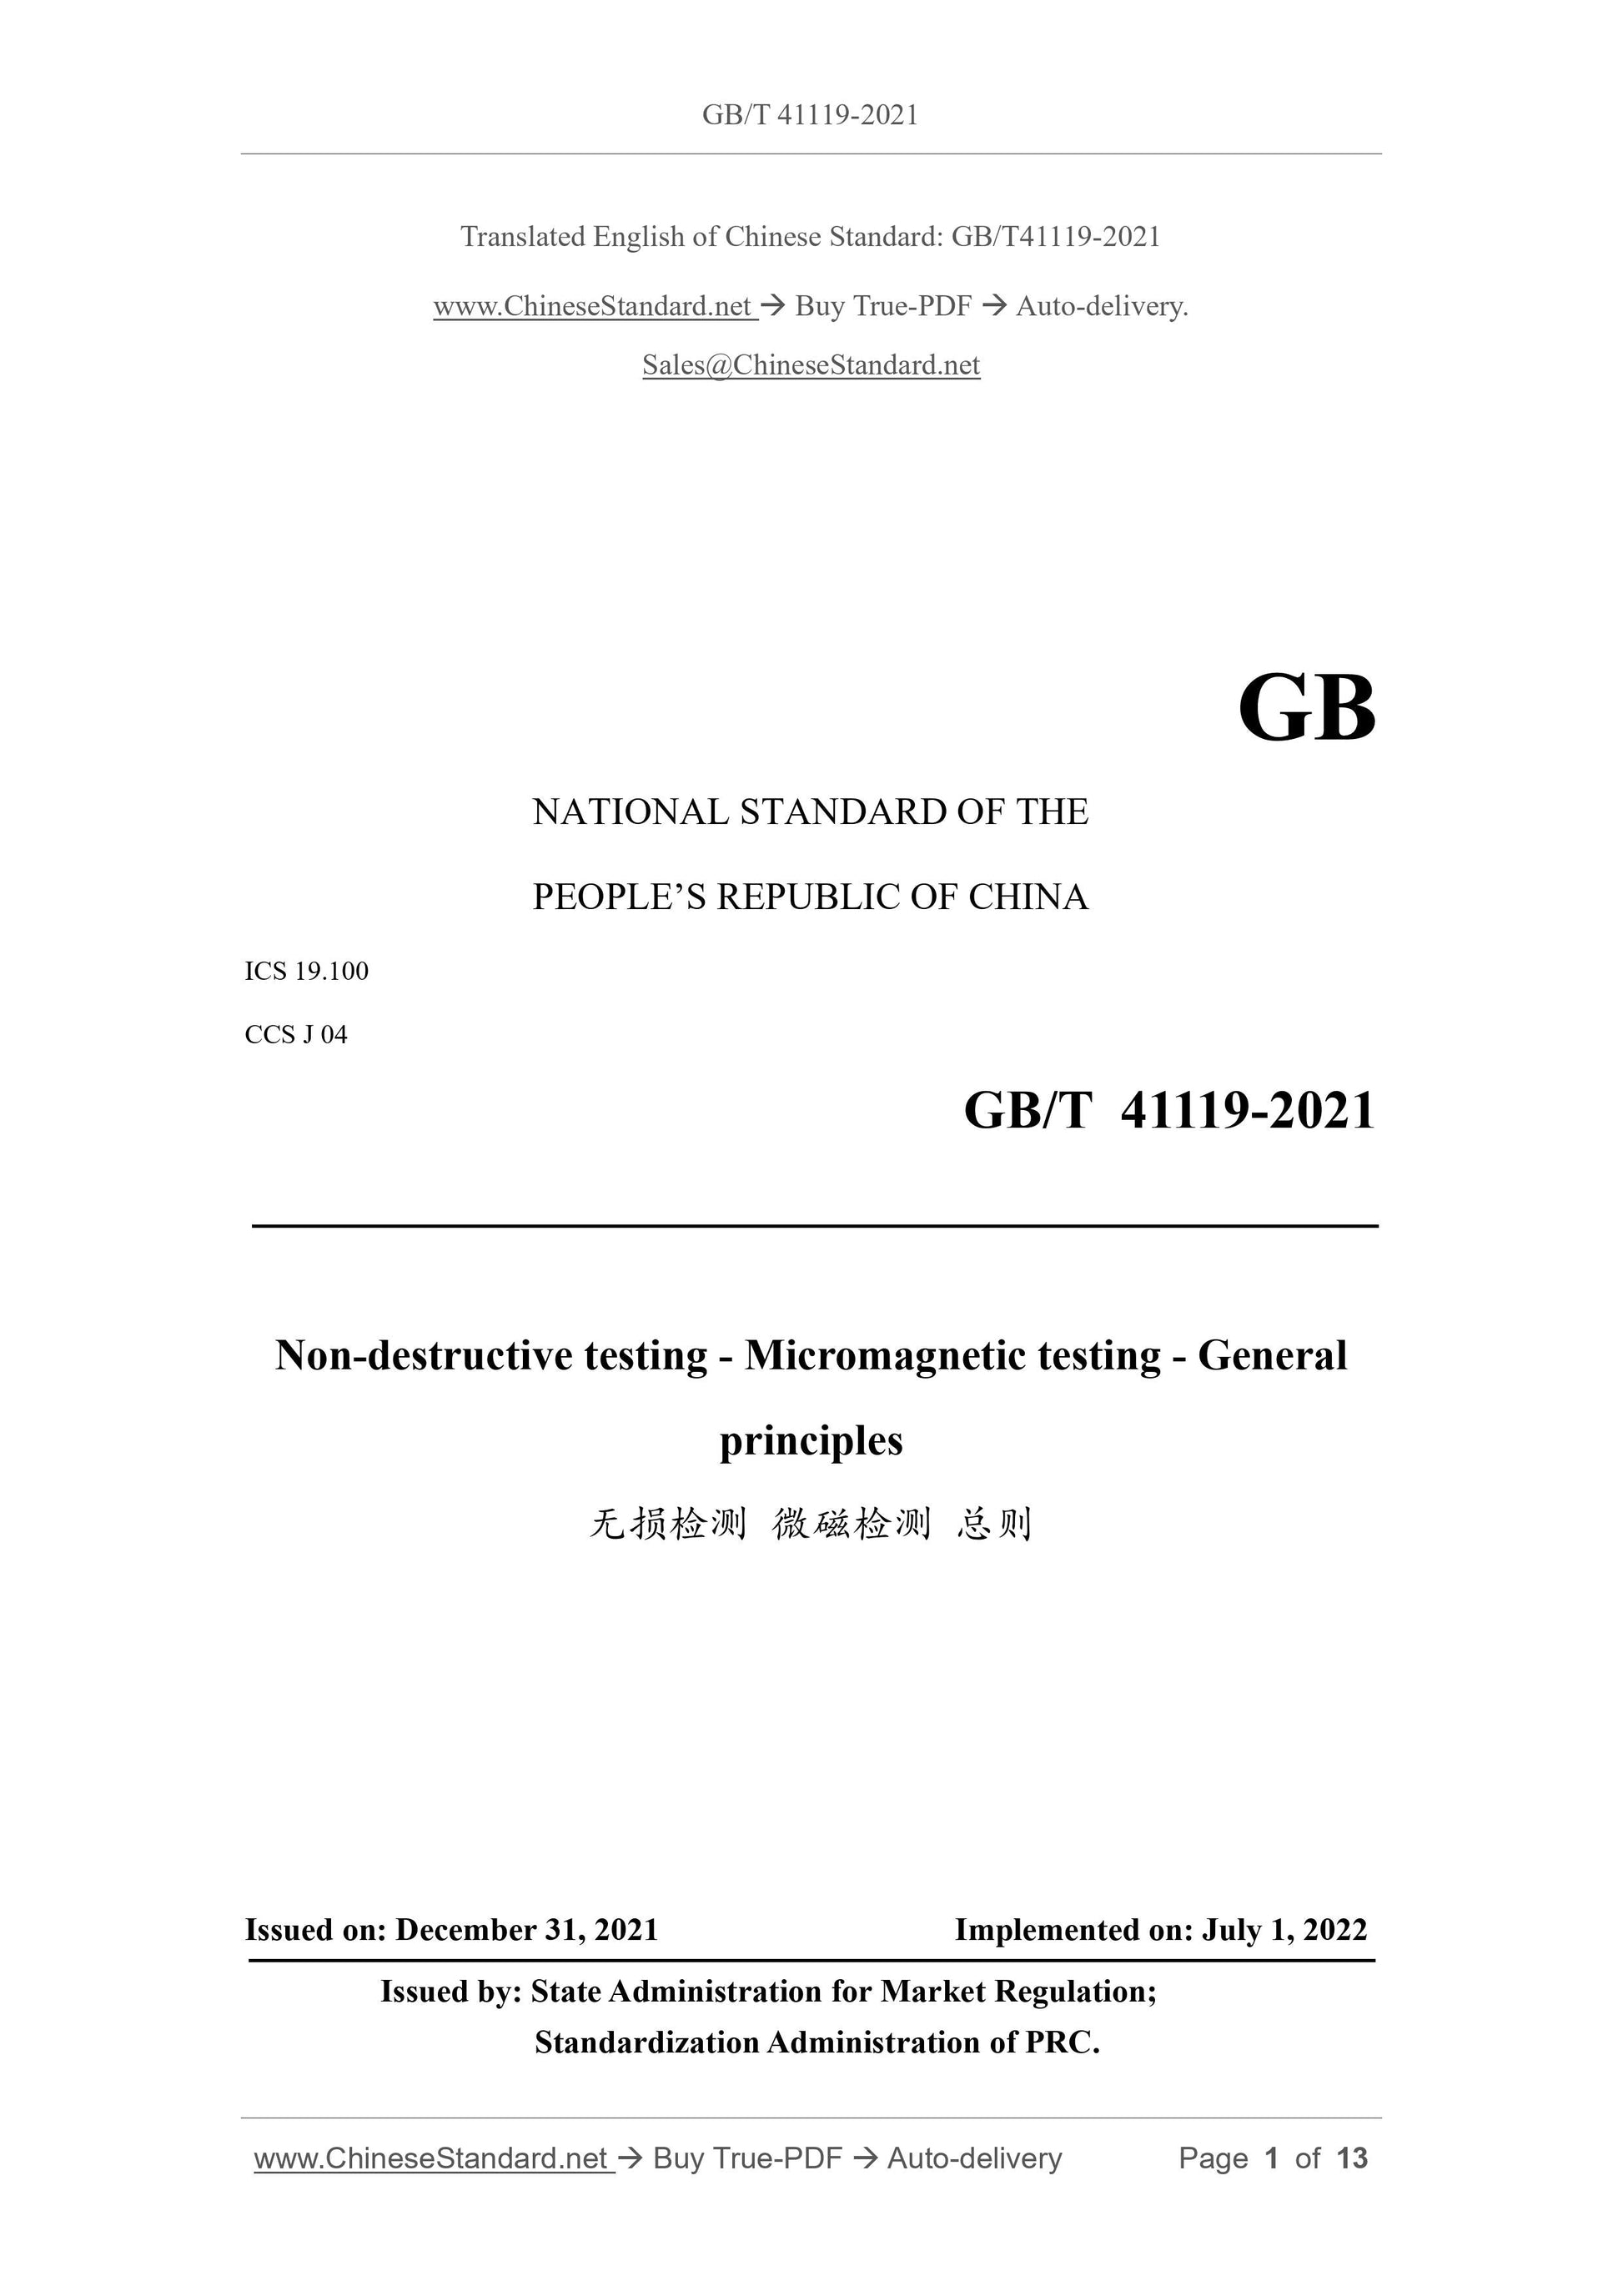 GB/T 41119-2021 Page 1